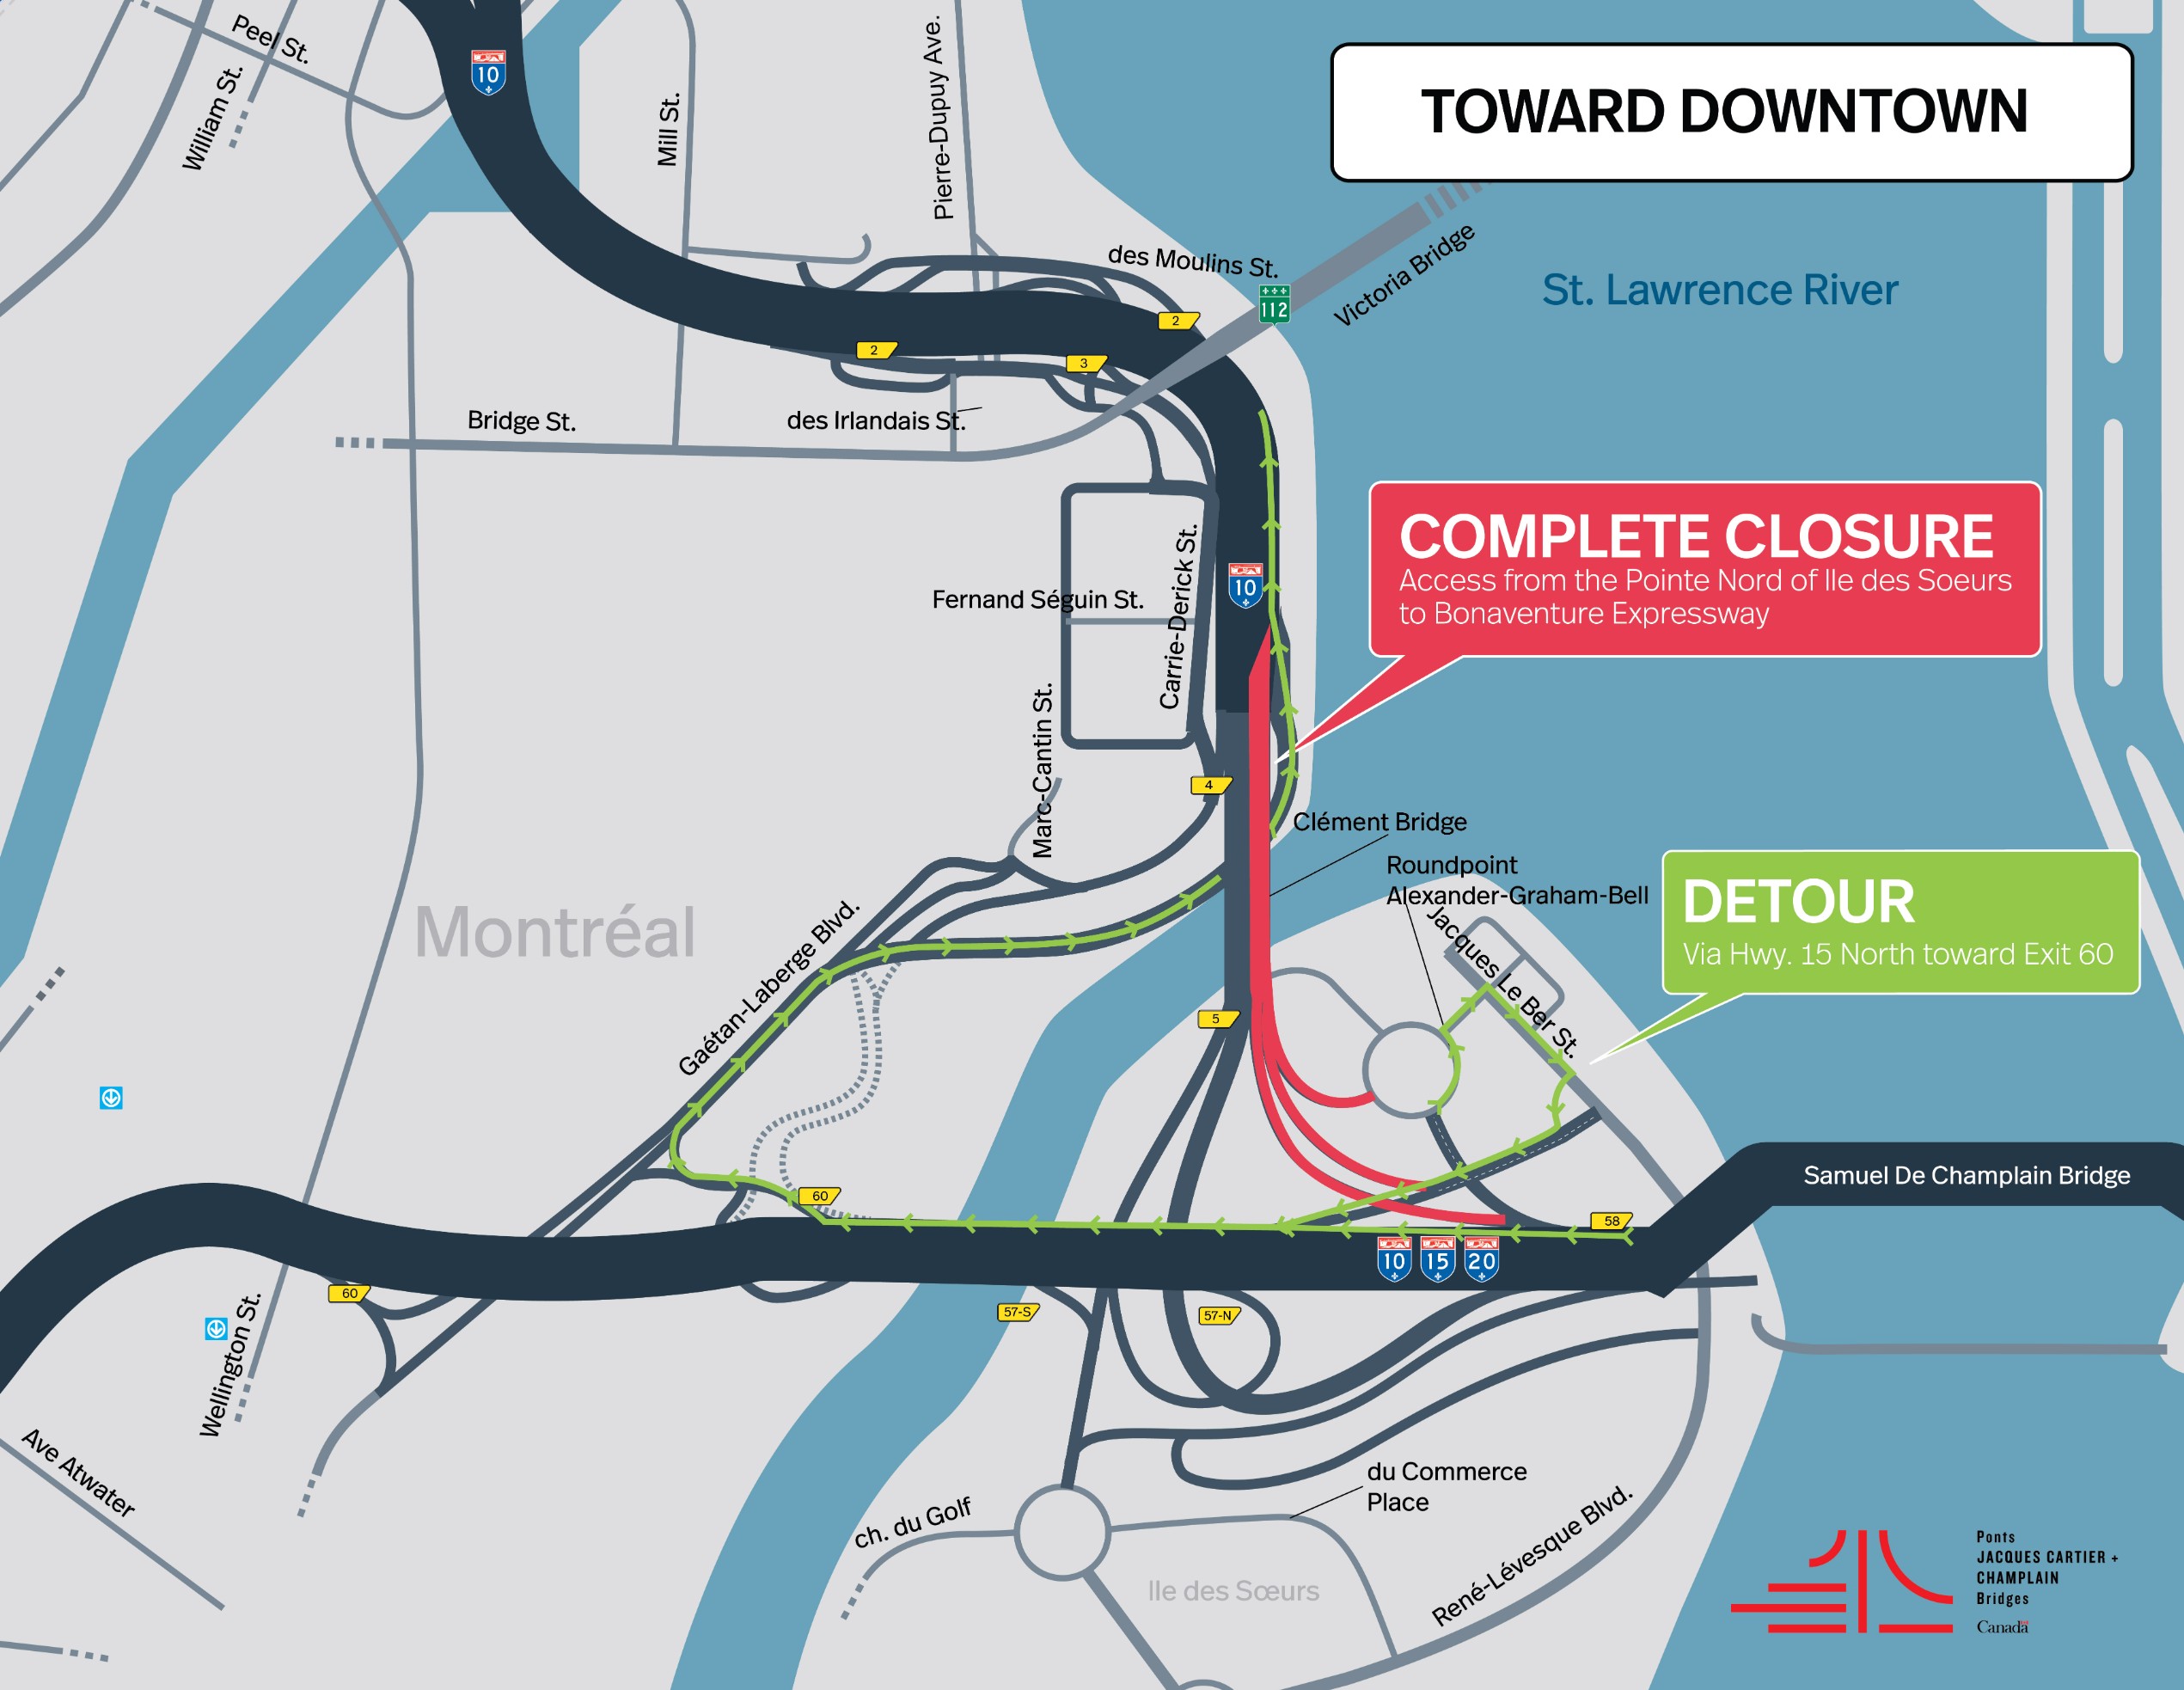 Bonaventure Expy. | Île des Sœurs sector: Complete night closure of access ramps to the Expy., toward downtown, on July 10